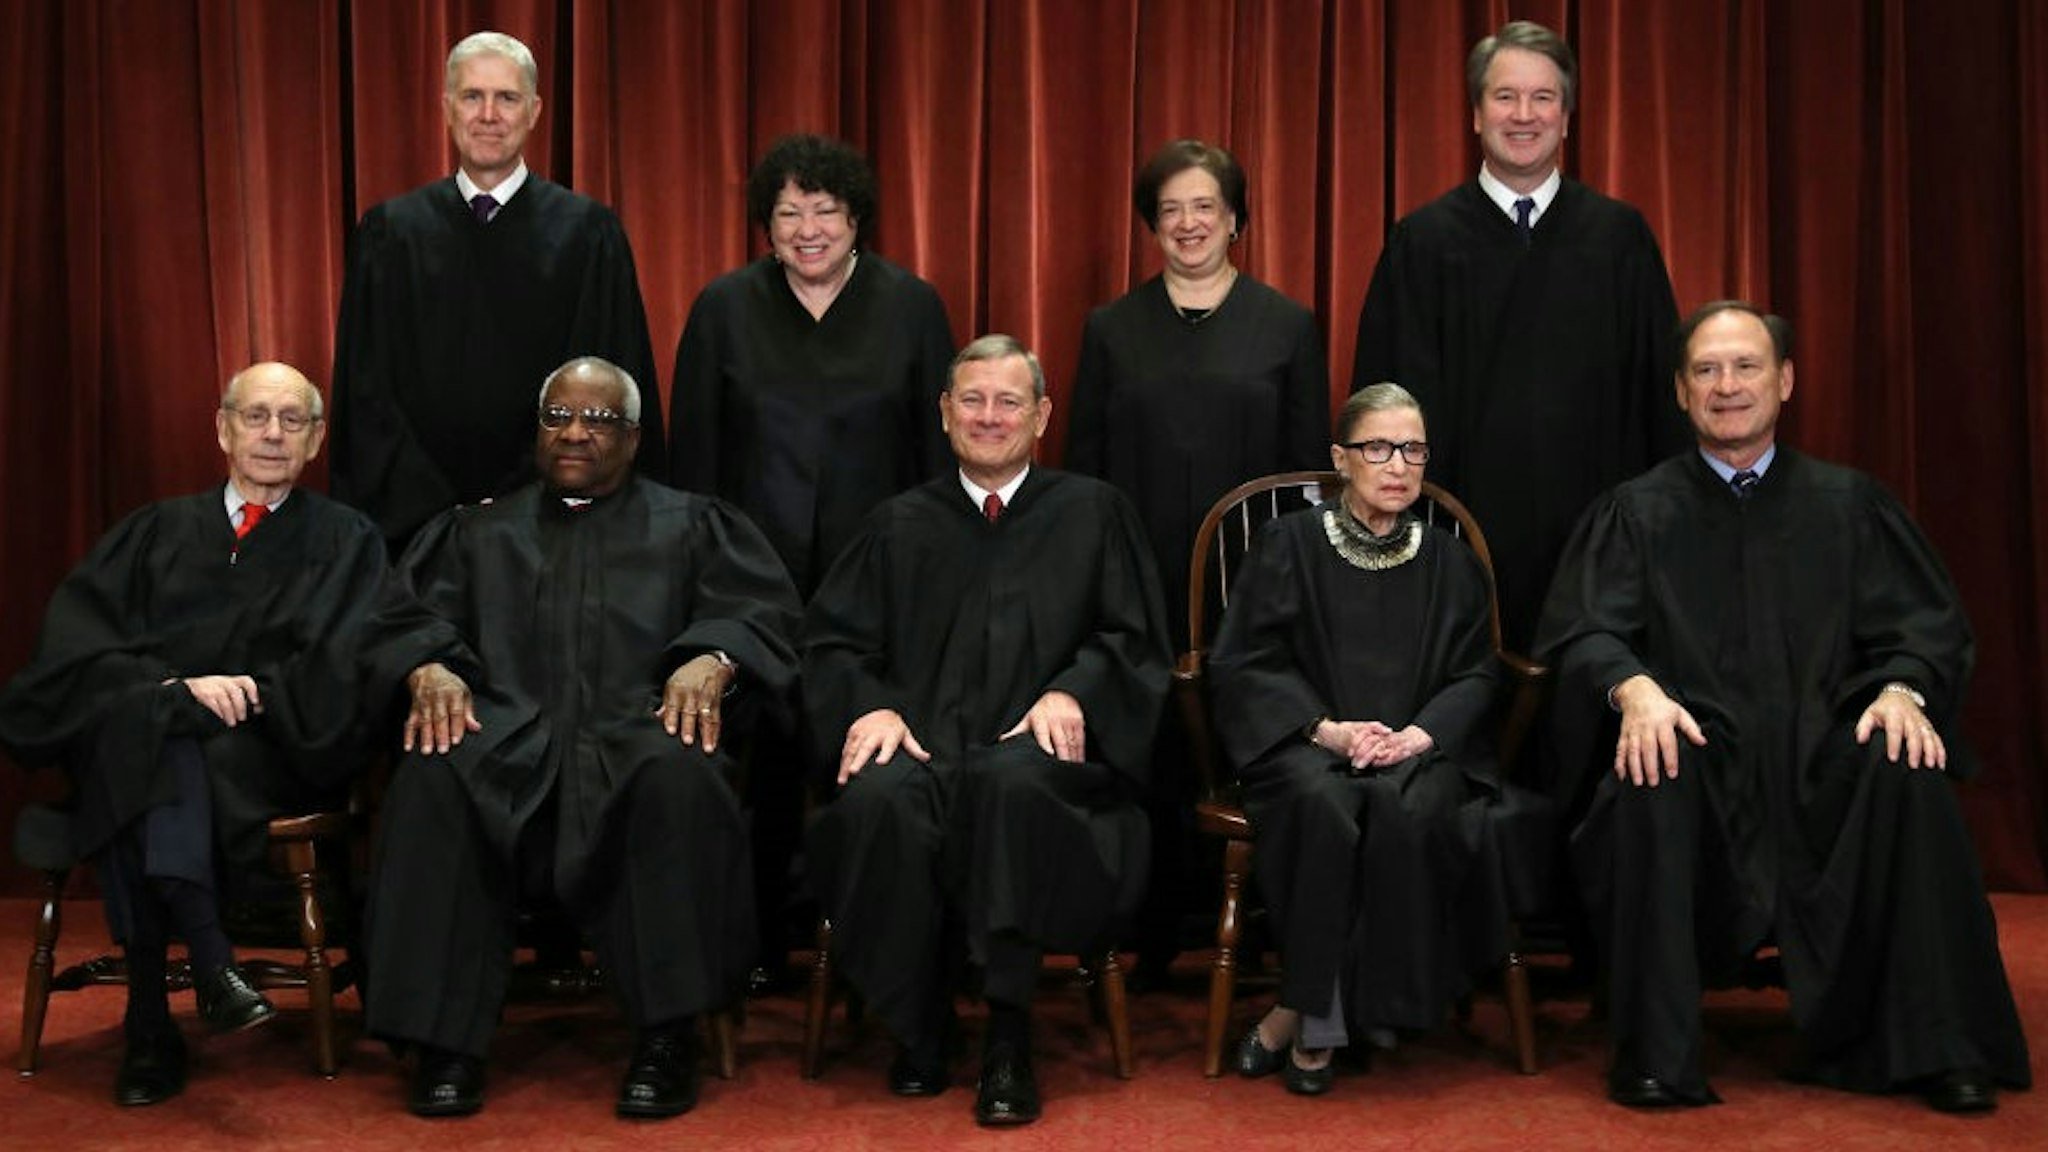 WASHINGTON, DC - NOVEMBER 30: United States Supreme Court (Front L-R) Associate Justice Stephen Breyer, Associate Justice Clarence Thomas, Chief Justice John Roberts, Associate Justice Ruth Bader Ginsburg, Associate Justice Samuel Alito, Jr., (Back L-R) Associate Justice Neil Gorsuch, Associate Justice Sonia Sotomayor, Associate Justice Elena Kagan and Associate Justice Brett Kavanaugh pose for their official portrait at the in the East Conference Room at the Supreme Court building November 30, 2018 in Washington, DC. Earlier this month, Chief Justice Roberts publicly defended the independence and integrity of the federal judiciary against President Trump after he called a judge who had ruled against his administration’s asylum policy “an Obama judge.” “We do not have Obama judges or Trump judges, Bush judges or Clinton judges,” Roberts said in a statement. “What we have is an extraordinary group of dedicated judges doing their level best to do equal right to those appearing before them. That independent judiciary is something we should all be thankful for.” (Photo by